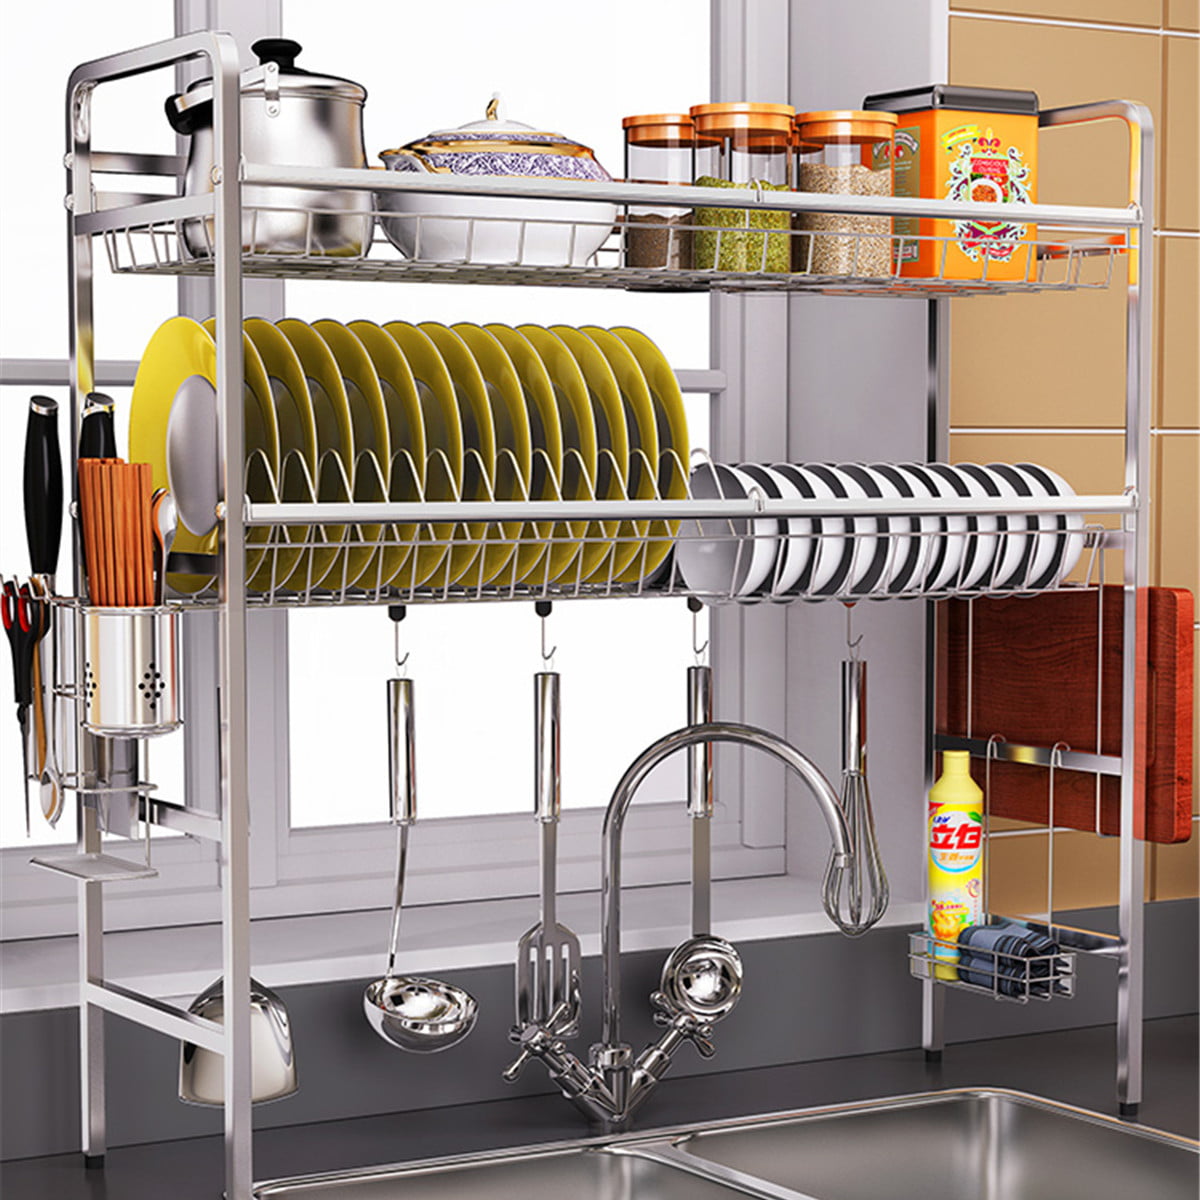 304 Stainless Steel 2 Tier Dish Drying Rack Over Sink Drainer Shelf Stainless Steel 2 Tier Dish Rack